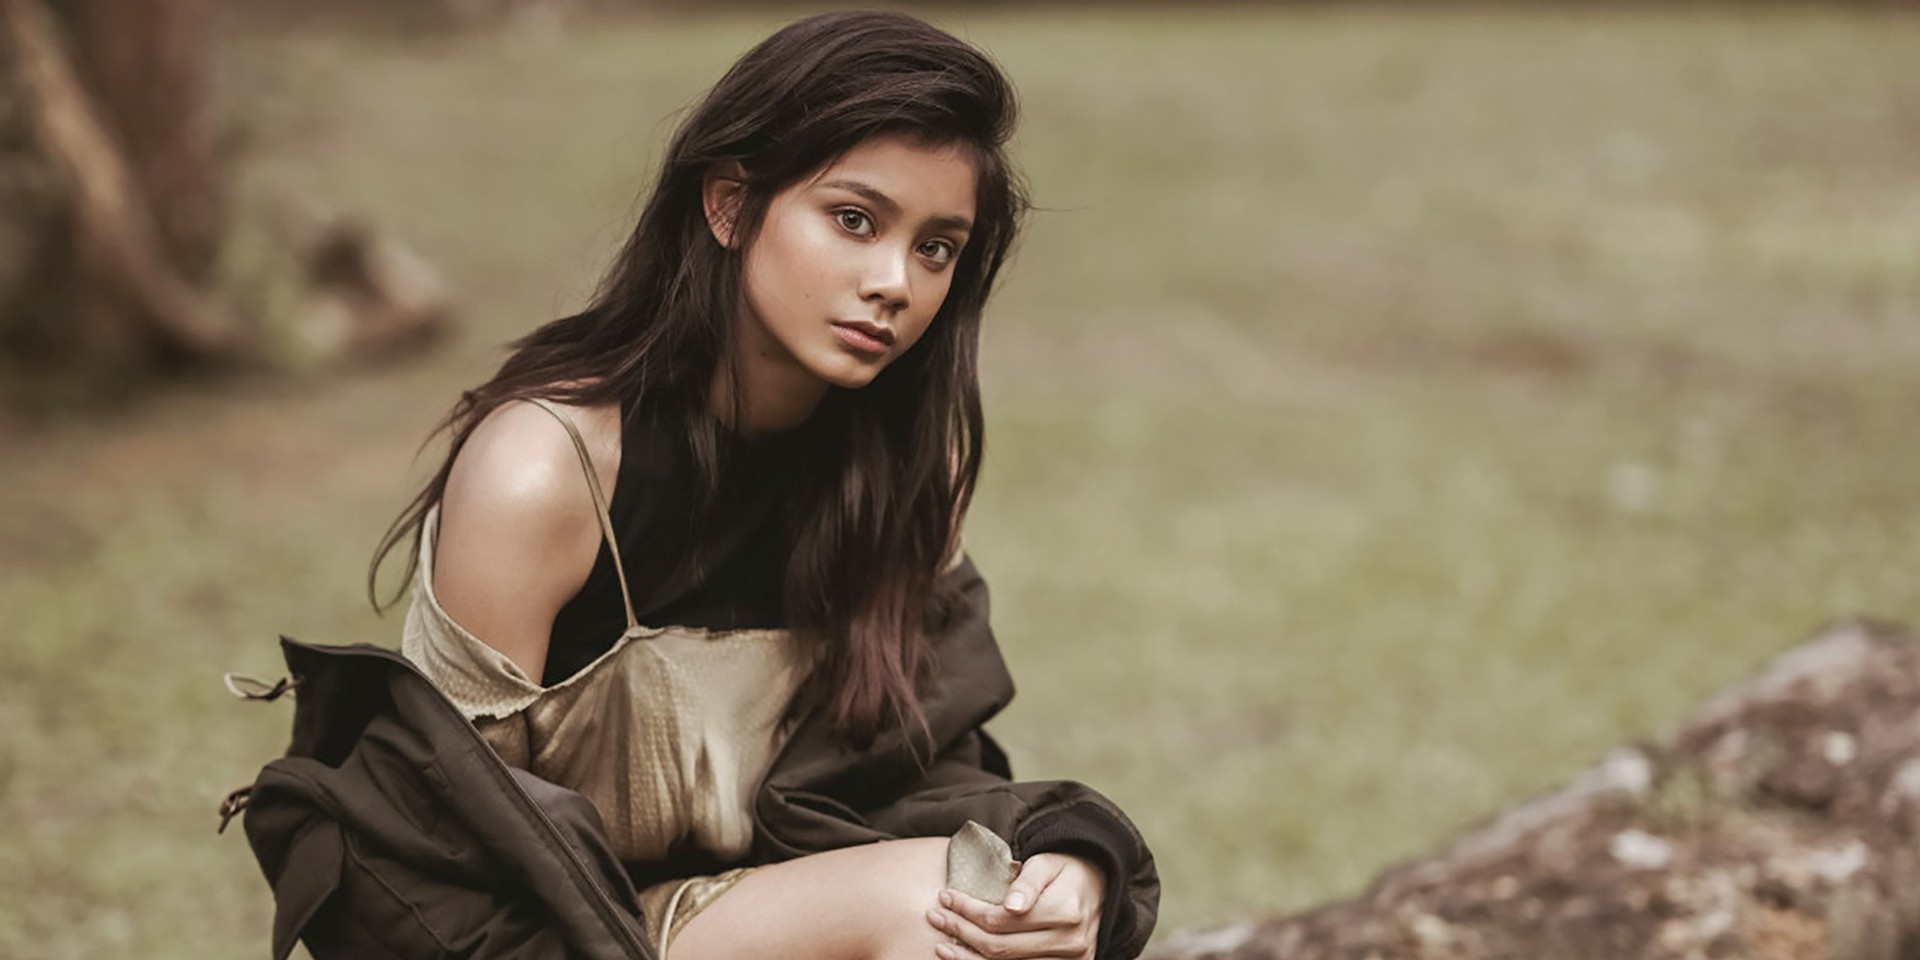 Ylona Garcia hospitalized due to stress: "I want everyone to be aware of their mental health"